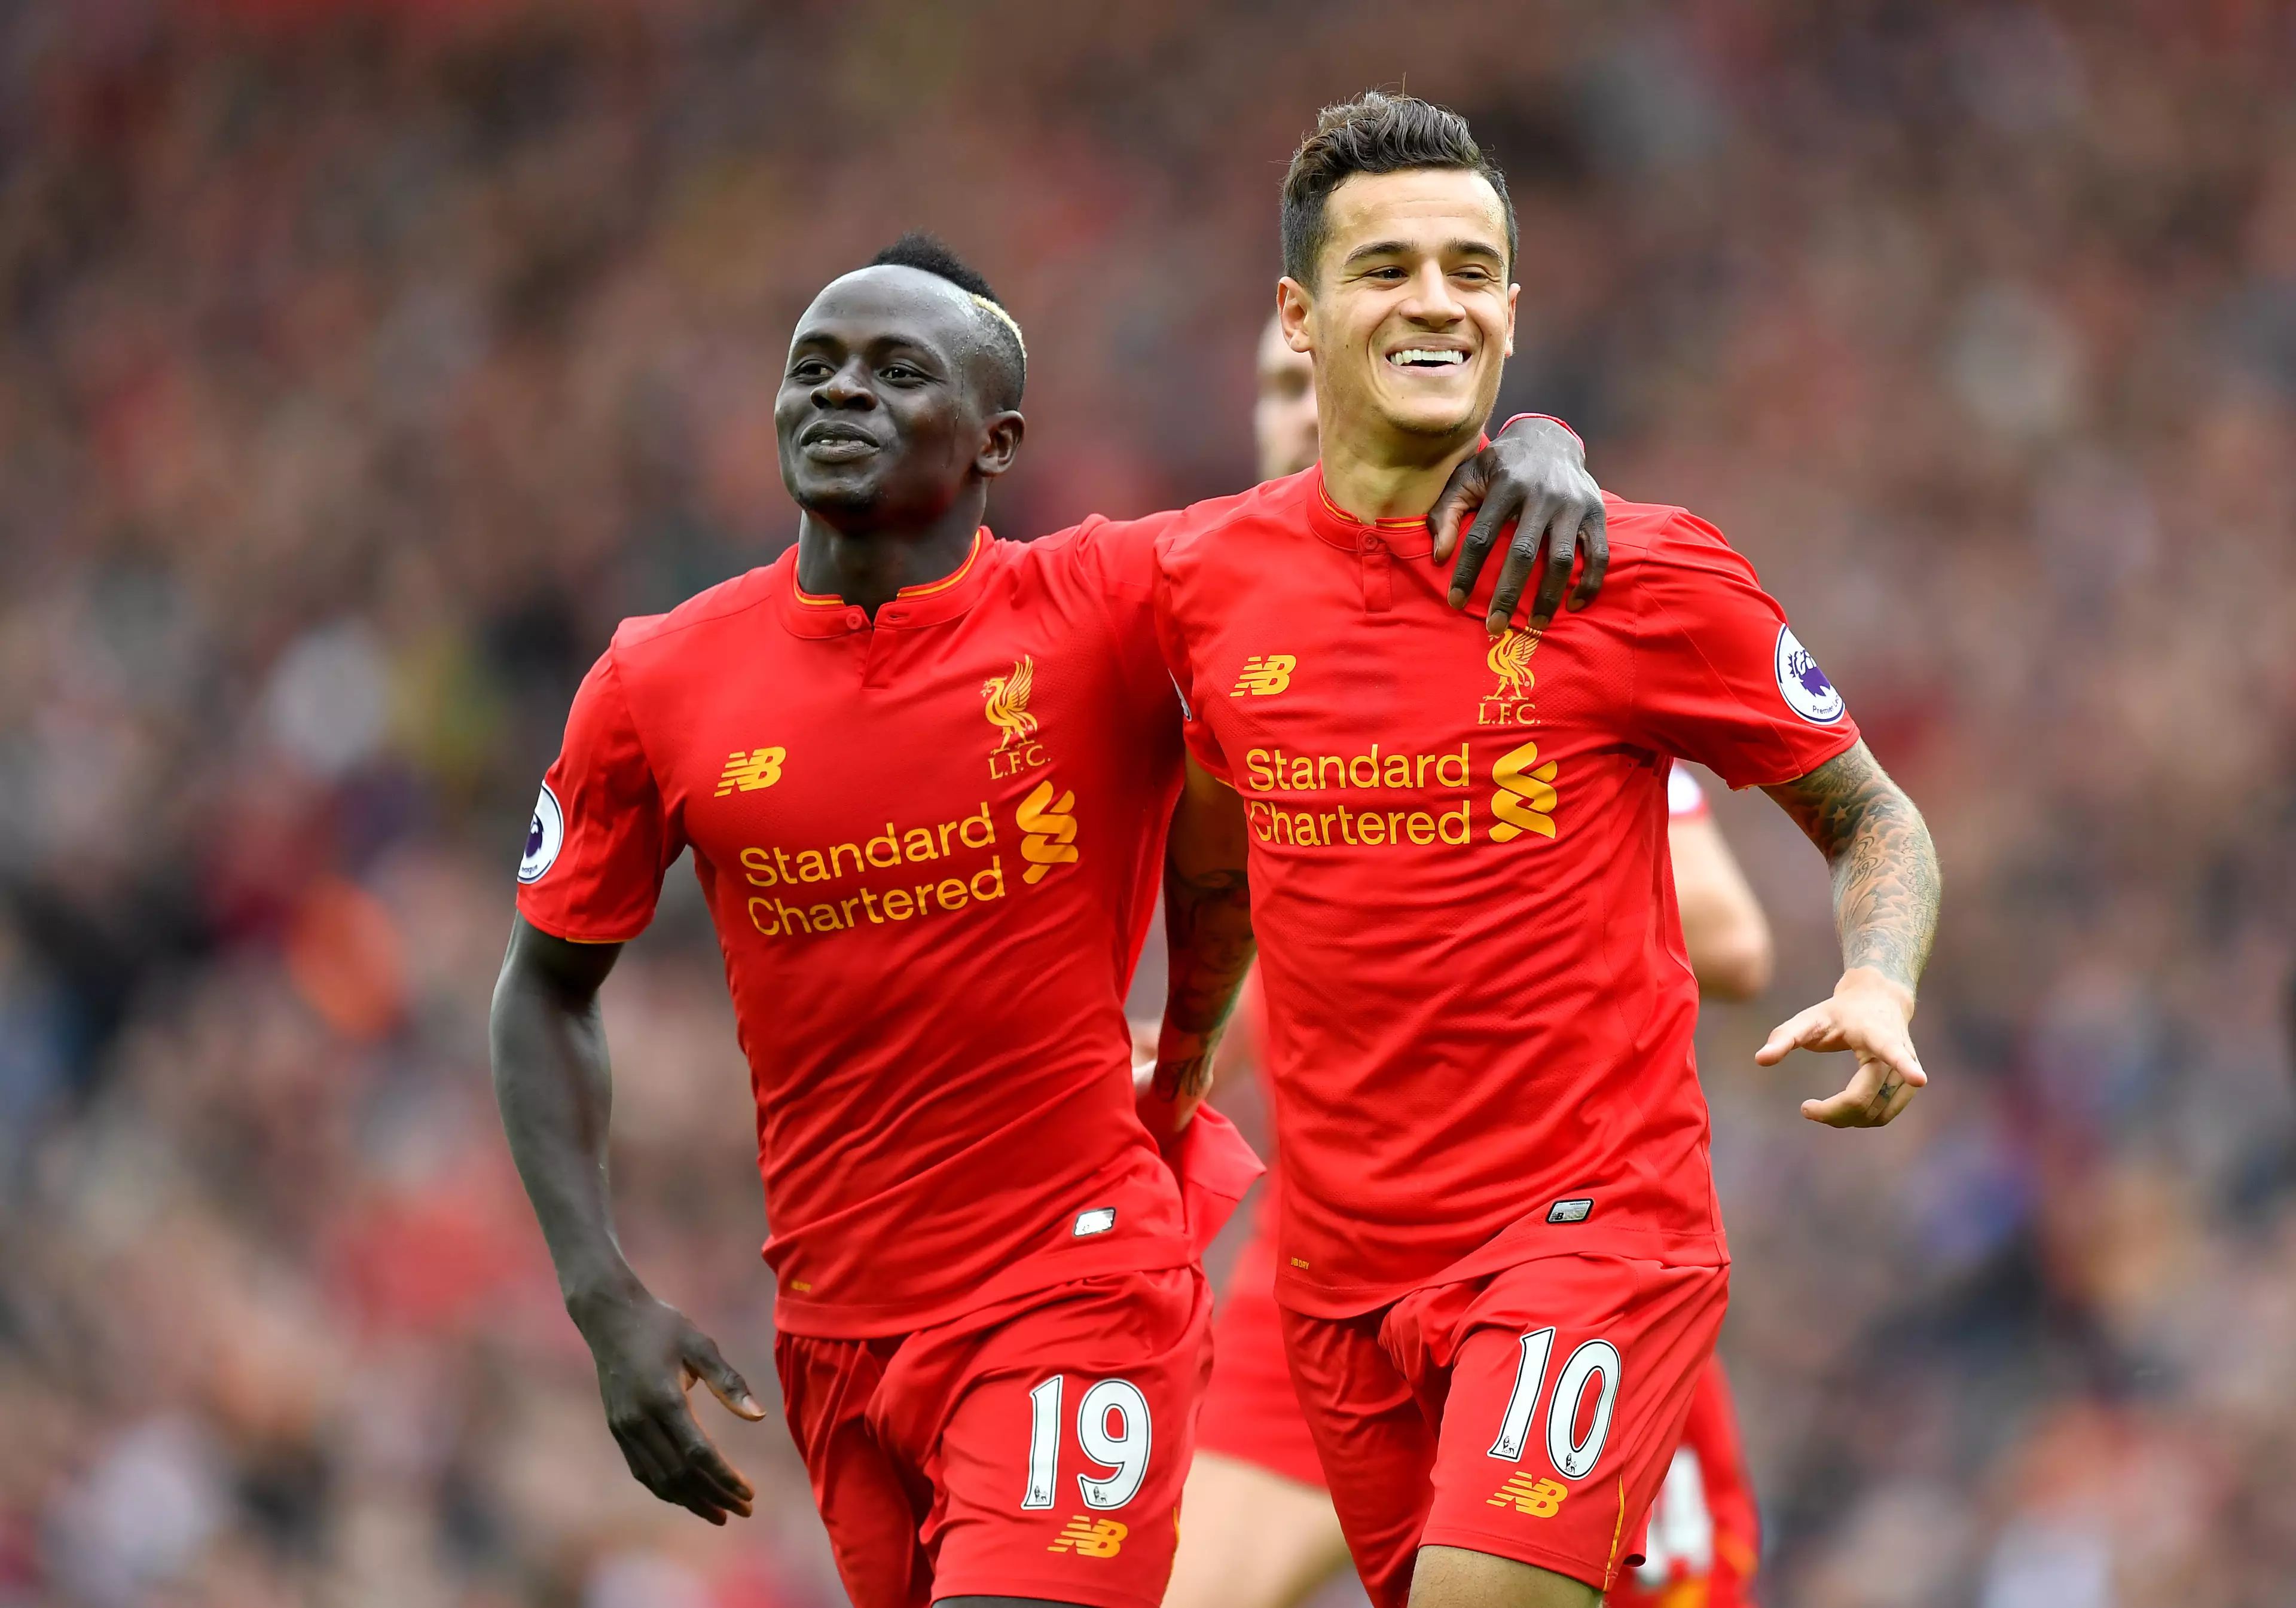 BREAKING: Philippe Coutinho Signs New Contract With Liverpool